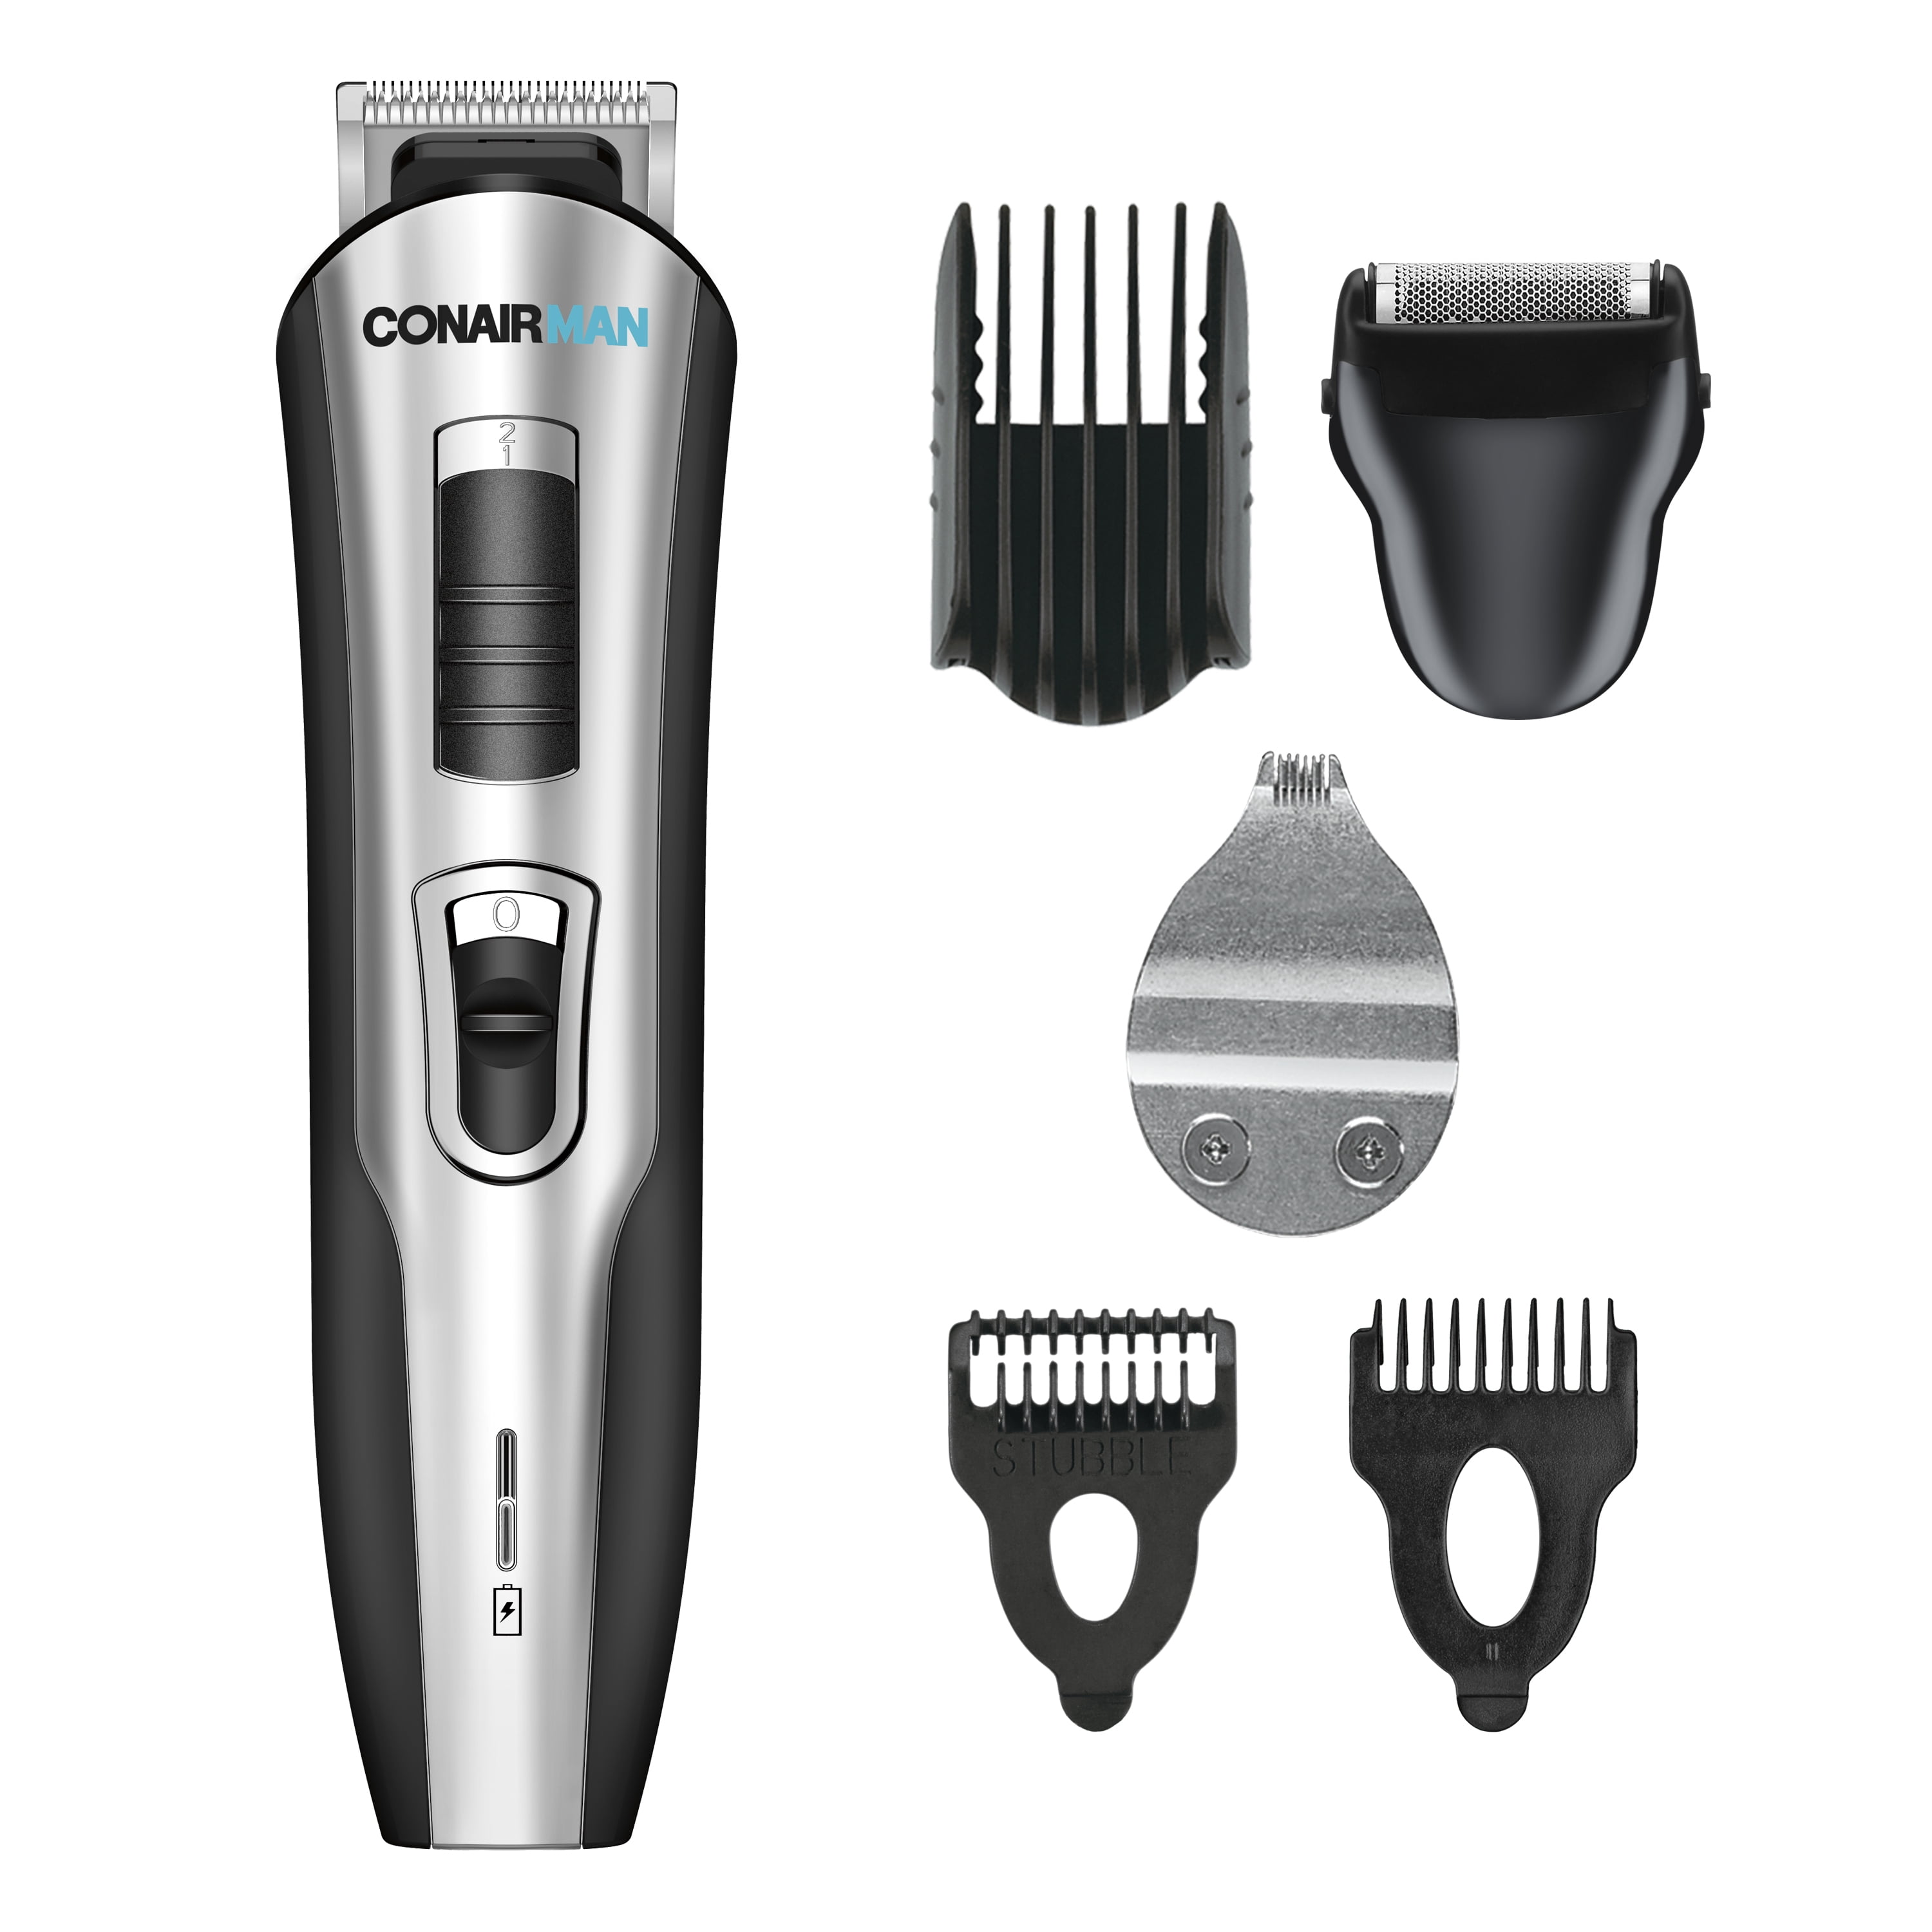 conair clippers target